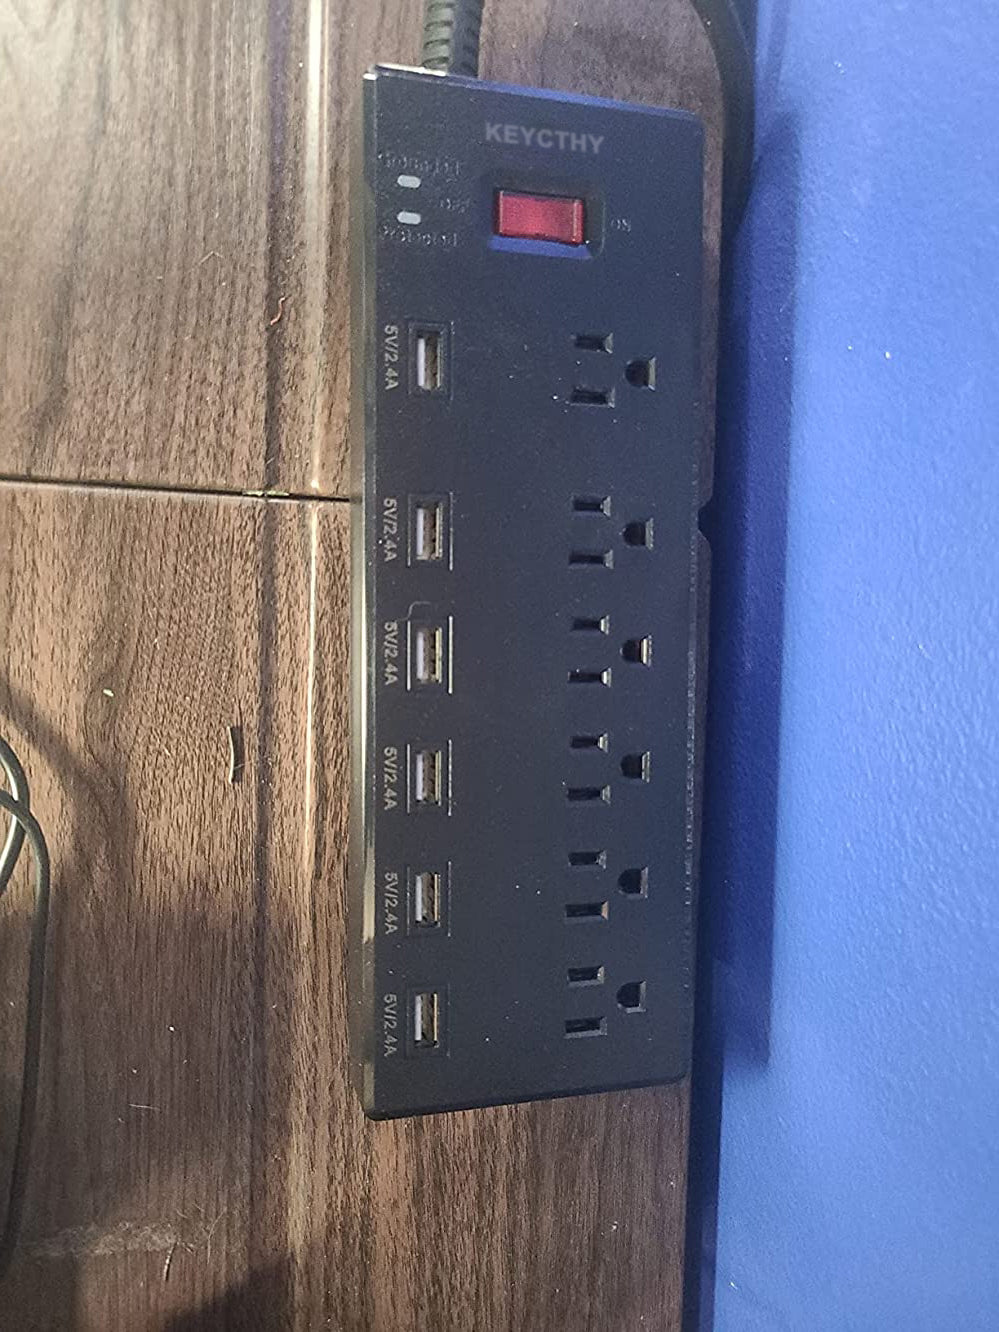 KEYCTHY Power Strip, Surge Protector with 6 AC Outlets and 6 USB Ports